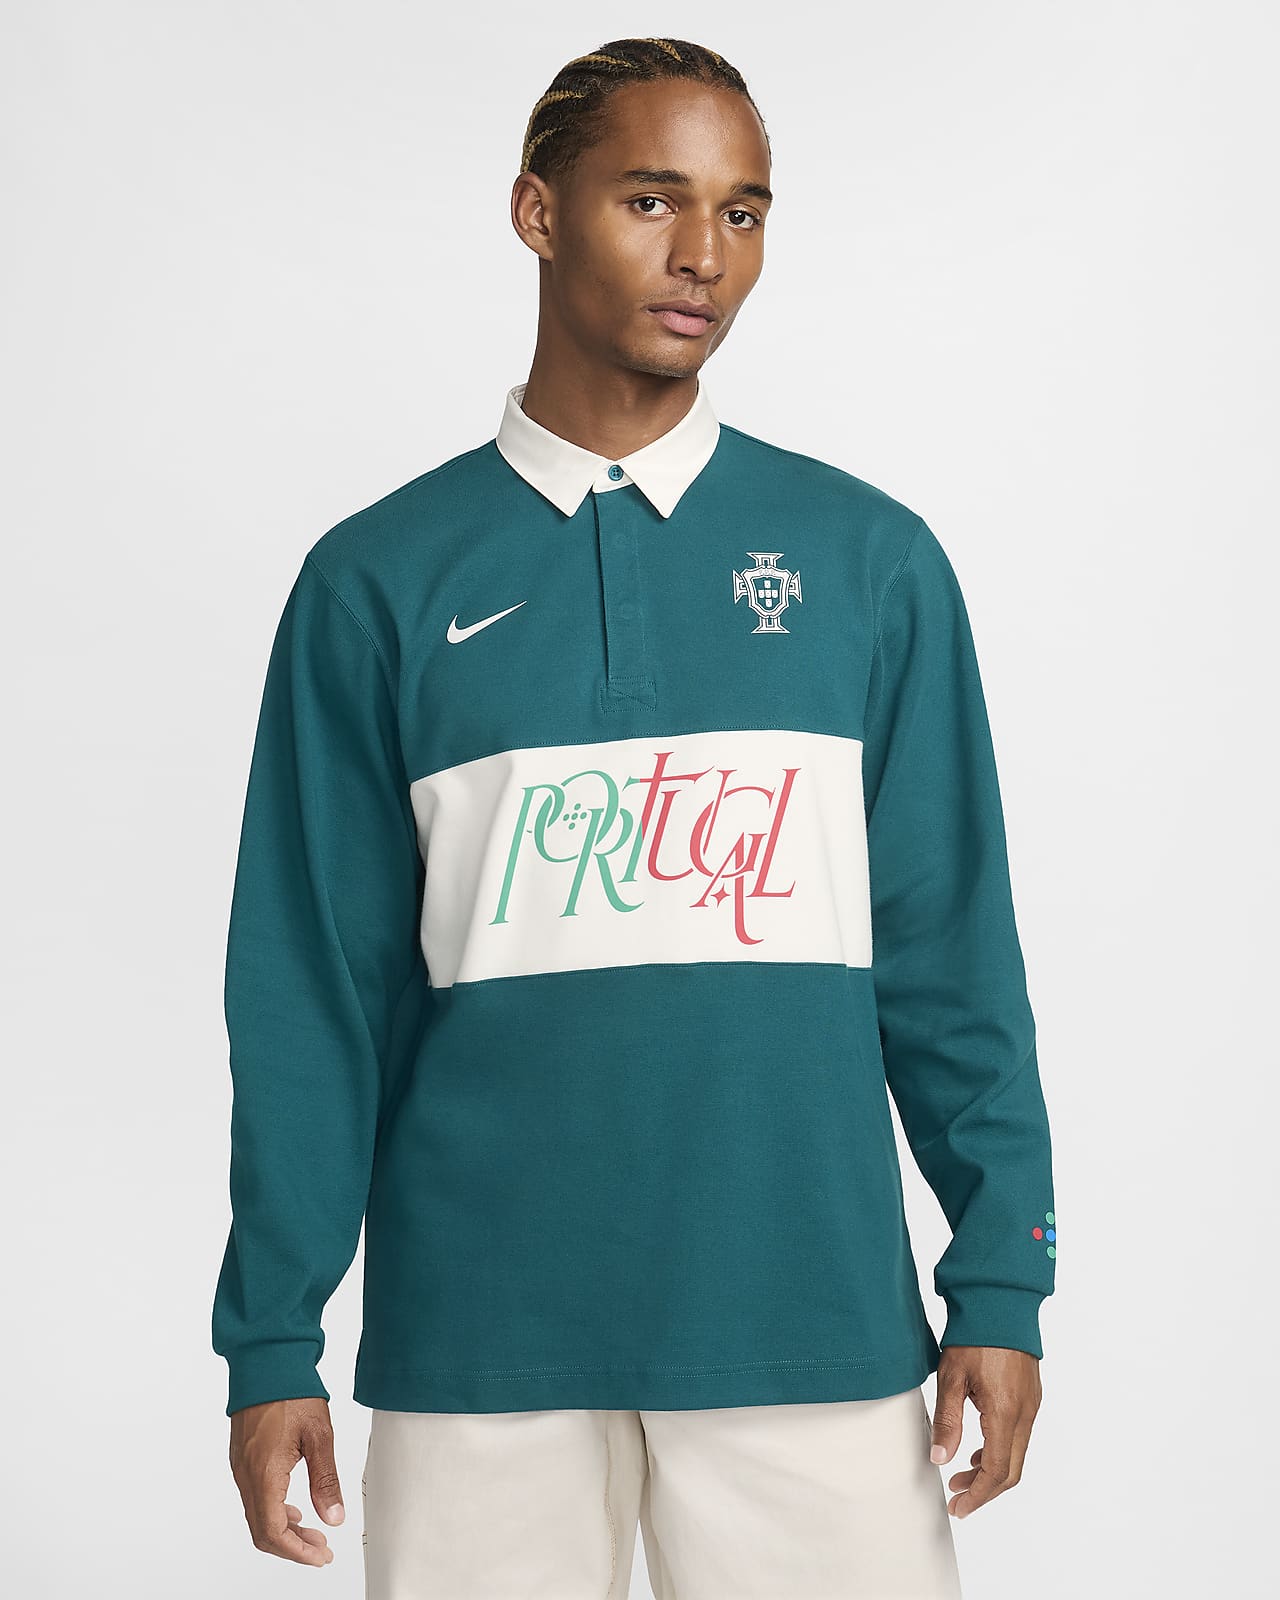 Portugal Men's Nike Rugby Top